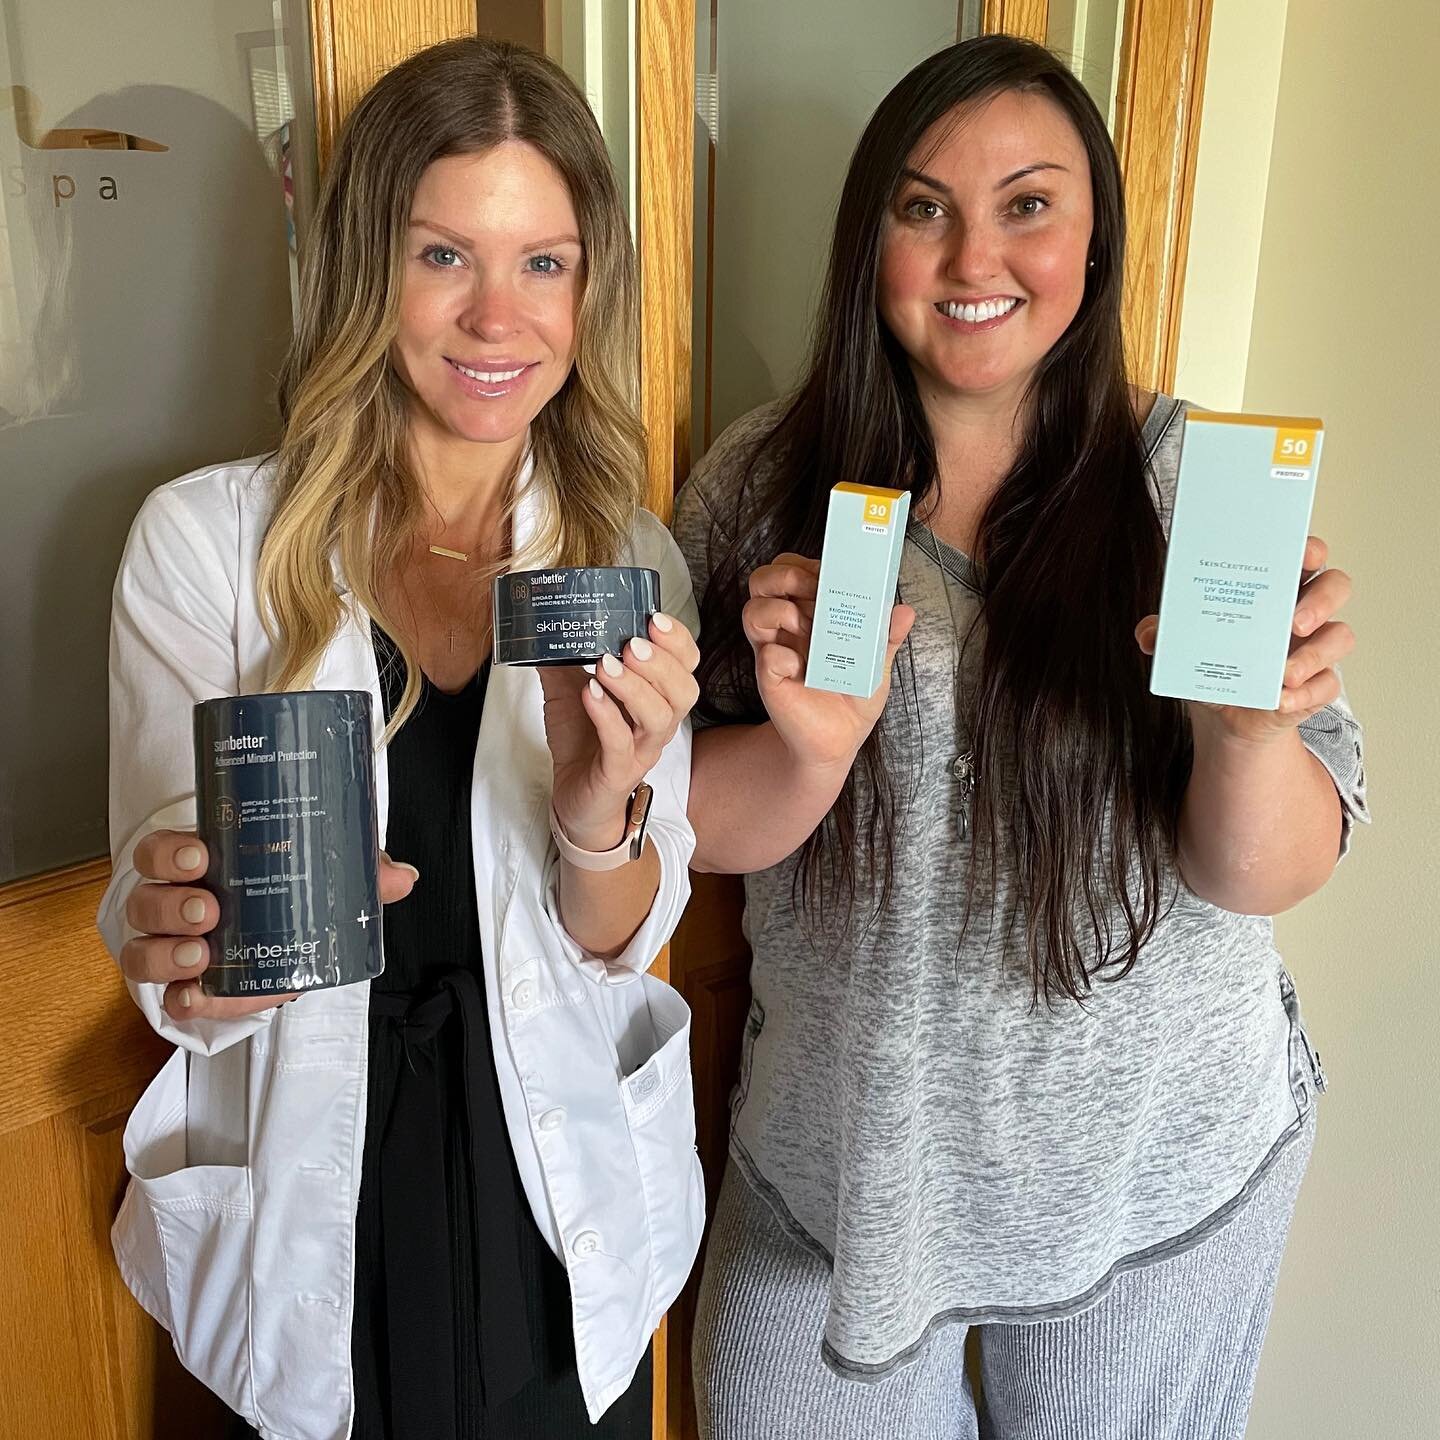 This is your gentle reminder to SPF daily! 🌞🧴

Medical grade skin care makes all the difference and our team is happy to help pick one to best fit your skin type ✨

@vallondarcy&rsquo;s favorites are from our @skinbetter line:
☀️ Mineral based 
☀️ 